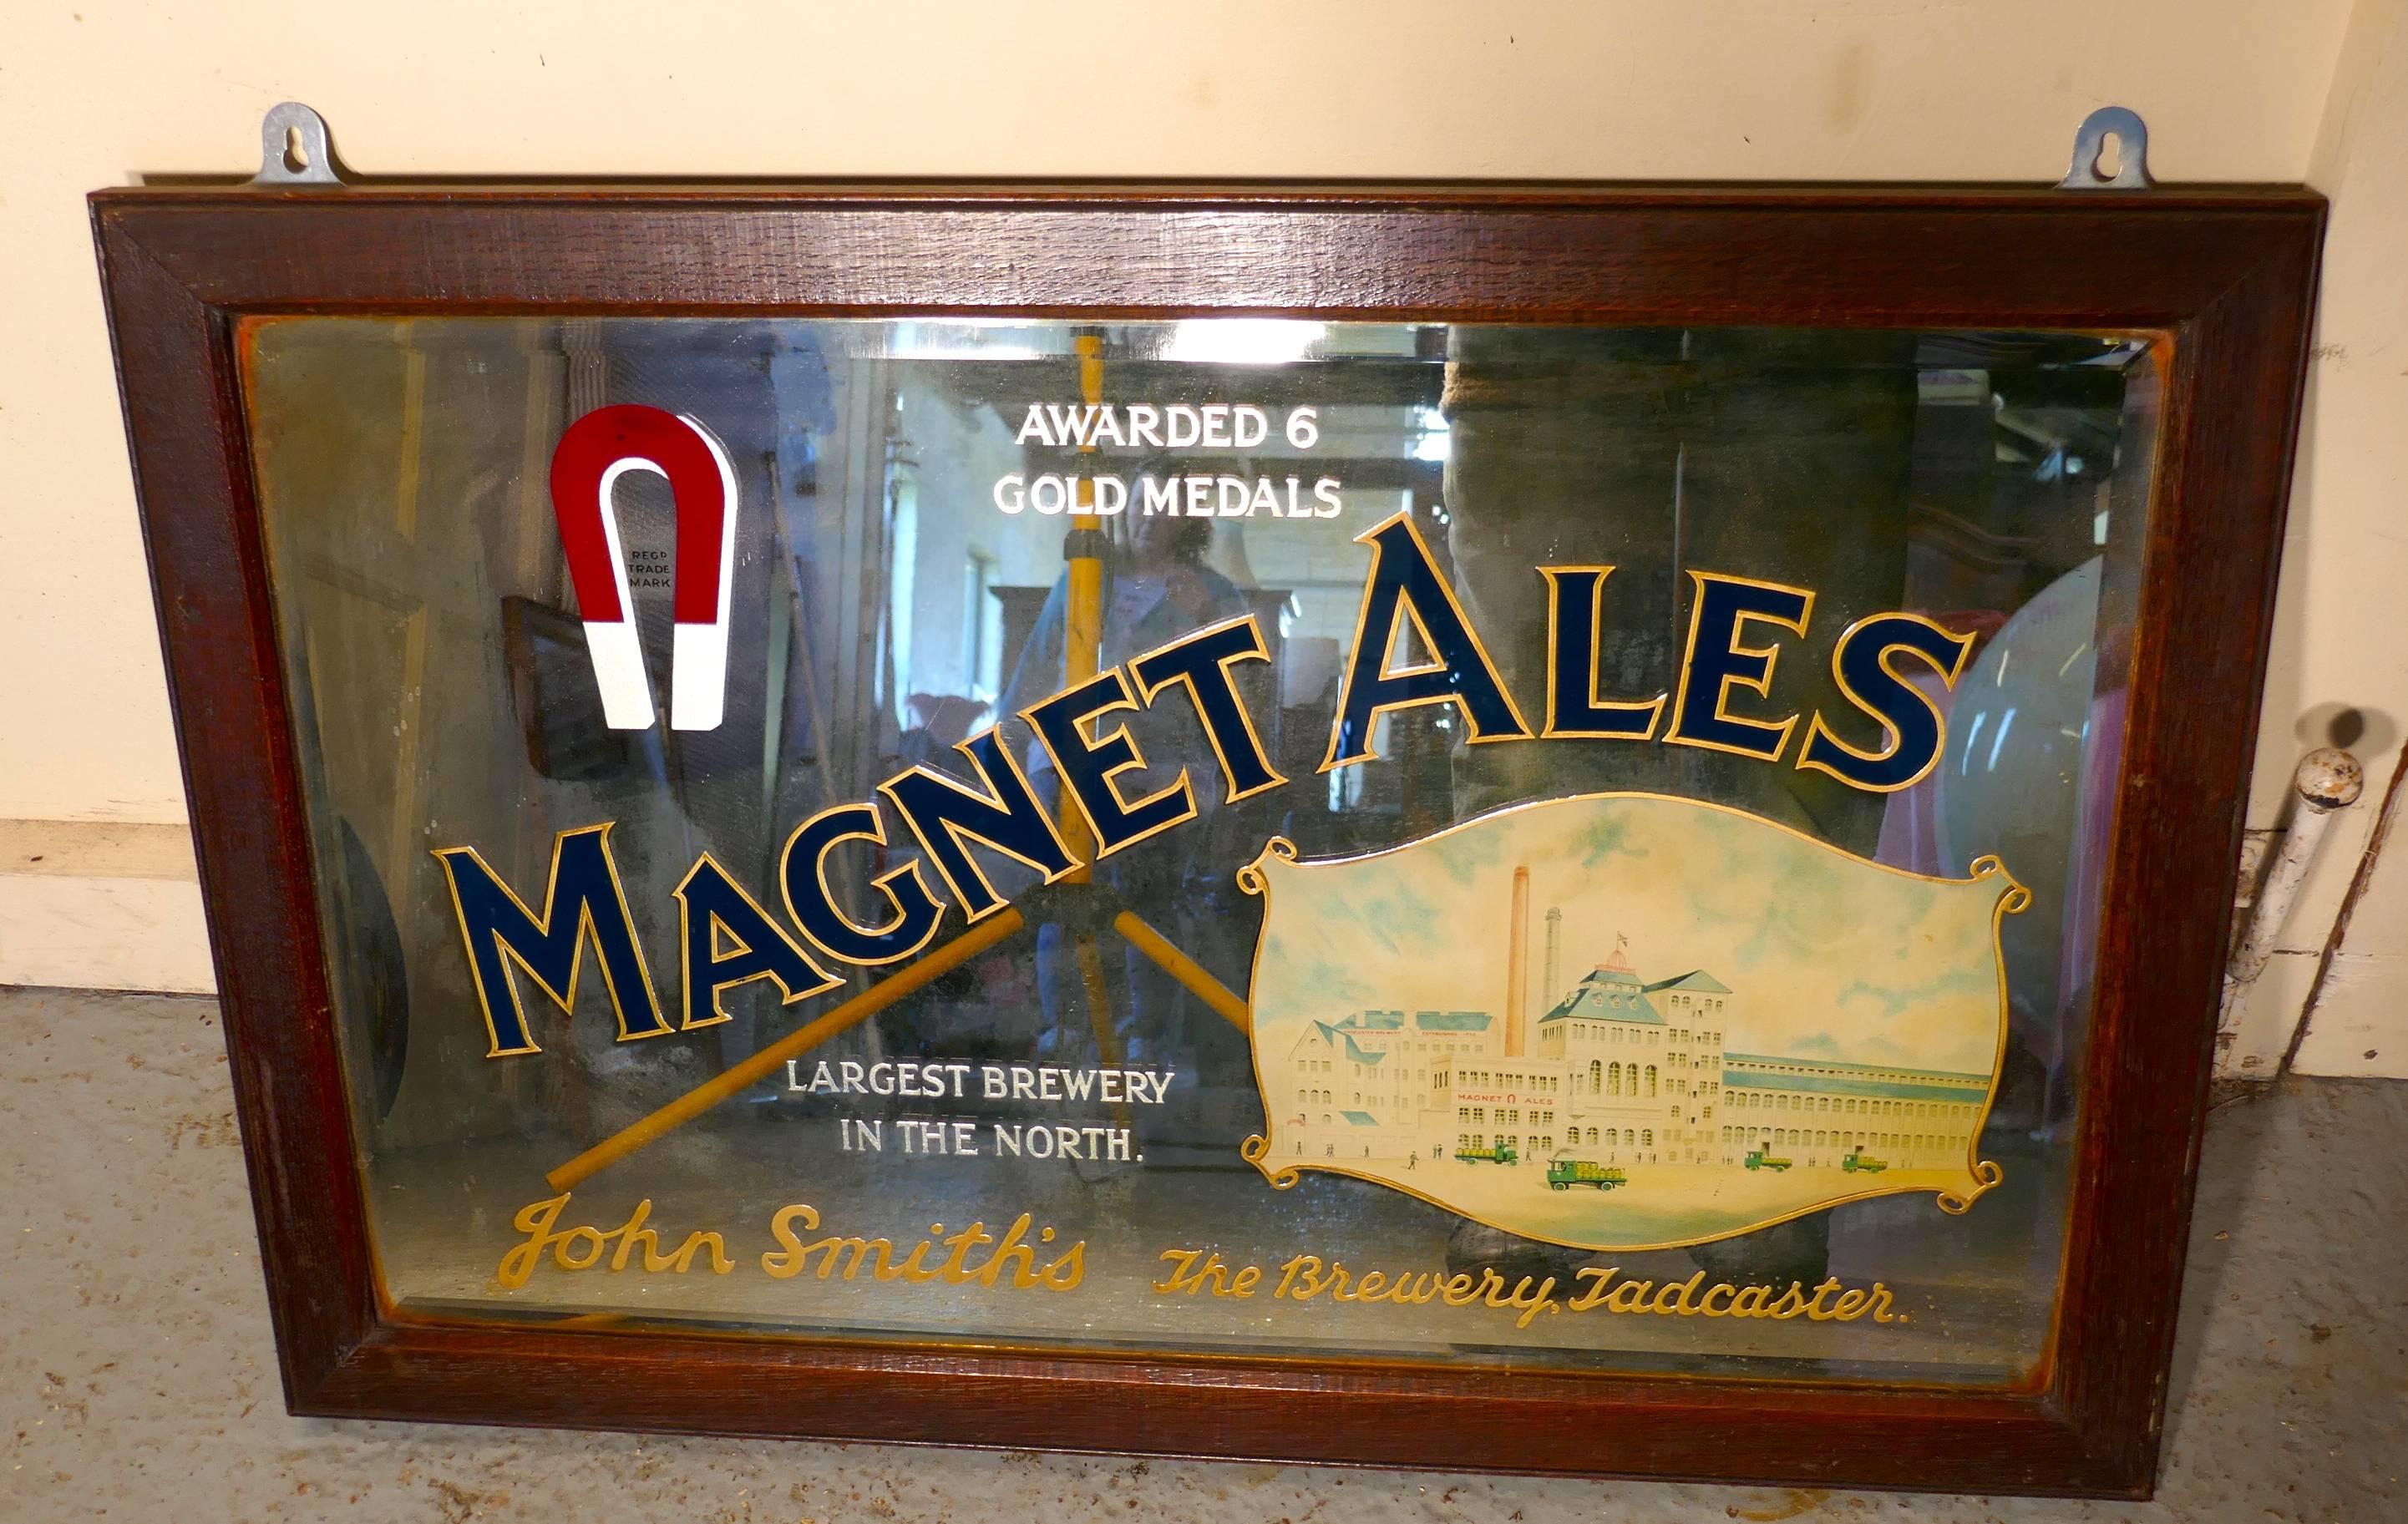 A large John Smith’s advertising mirror, pub mirror for Magnet Ales

This is wonderful pictorial advertising mirror, advertising “The largest Brewery in the North” (Tadcaster)
The mirror proudly announced six gold medals and has a picture of the